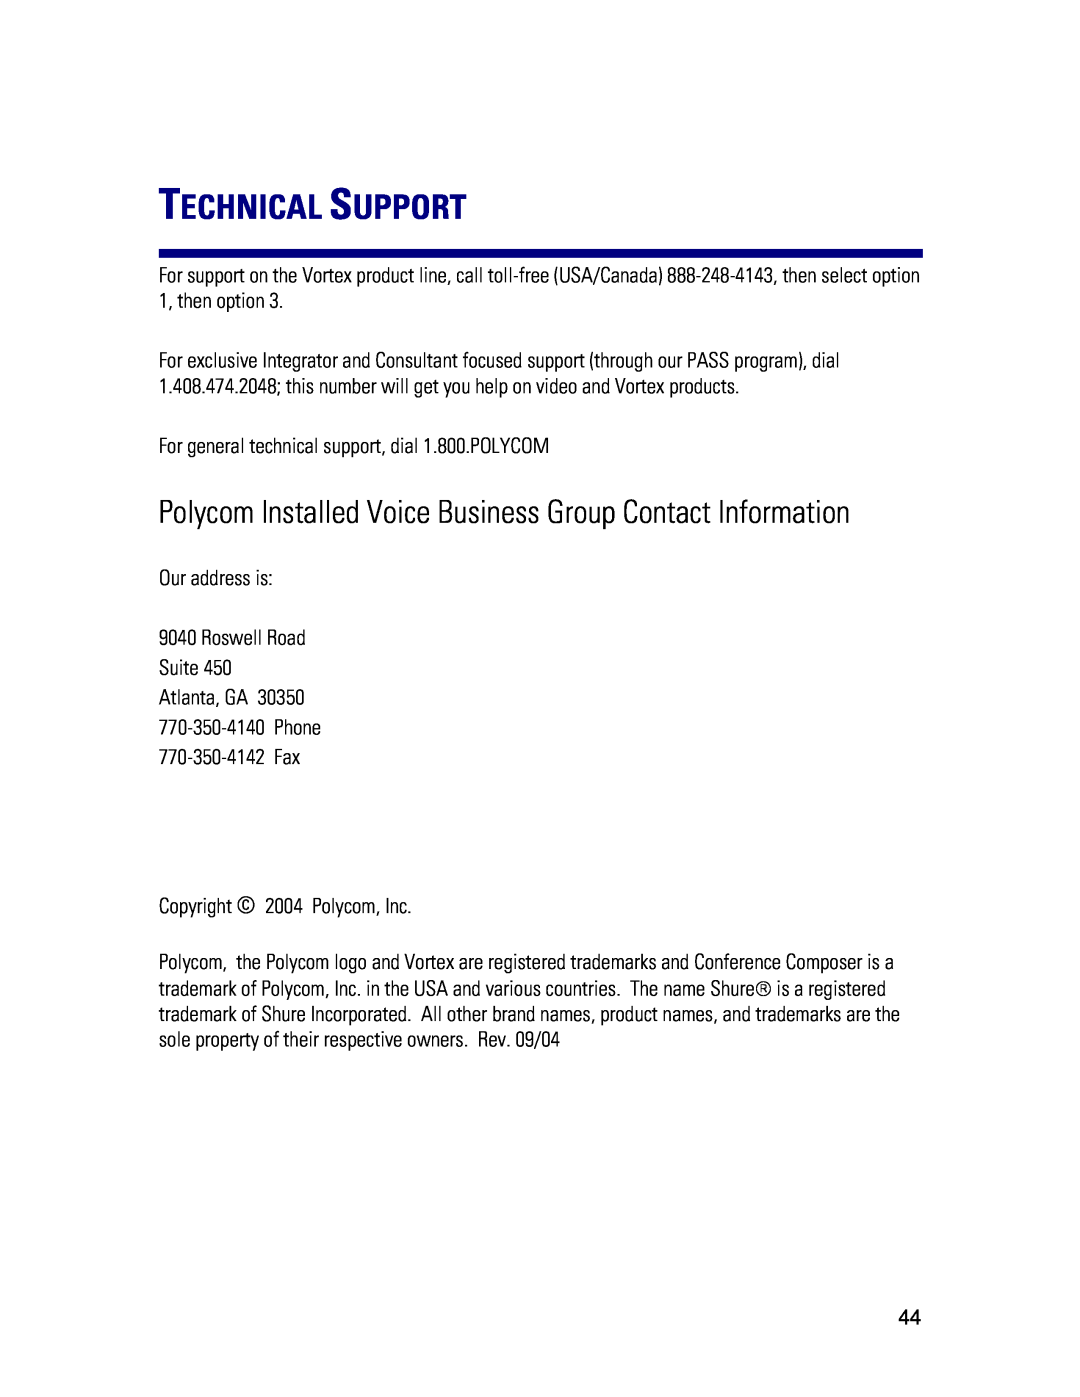 Polycom MX392 manual Technical Support, Polycom Installed Voice Business Group Contact Information 